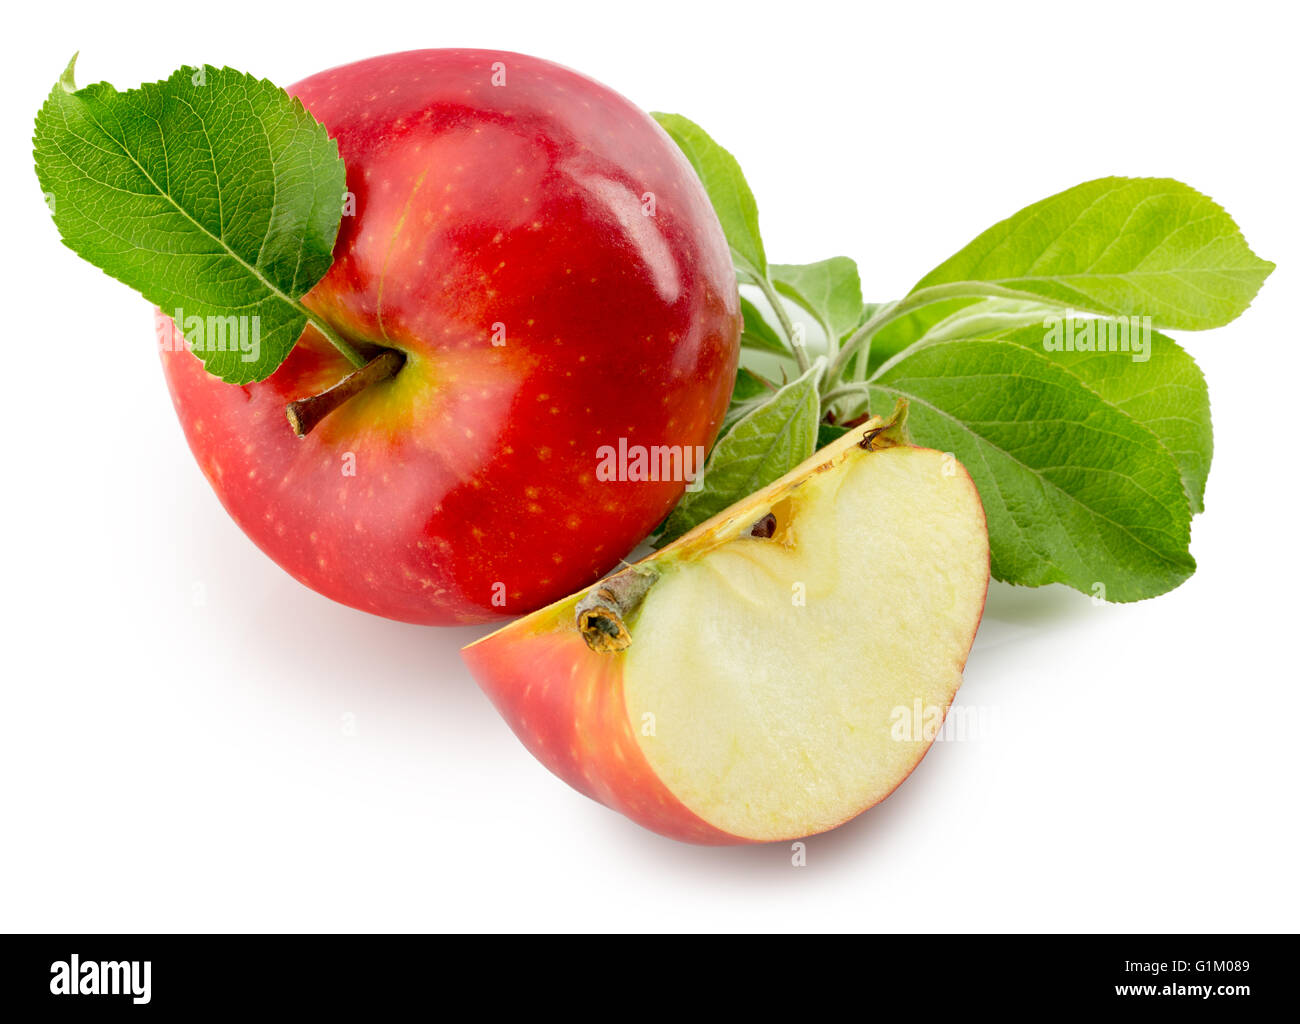 red apples isolated on a white background. Stock Photo